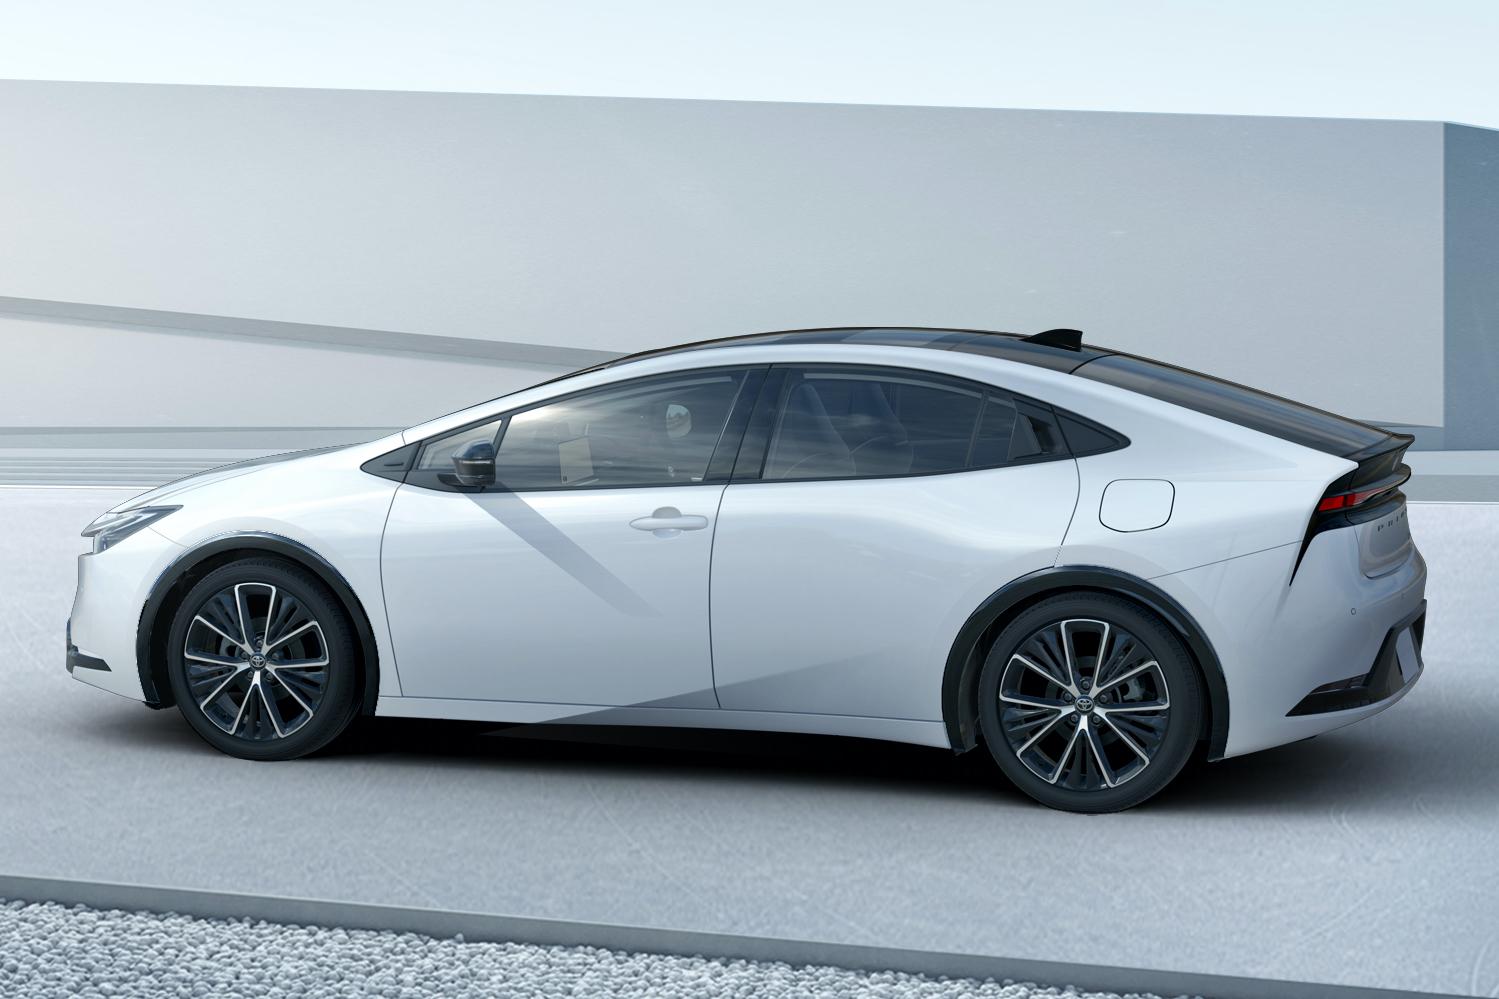 Toyota unveils new Prius models and they are ... cool?